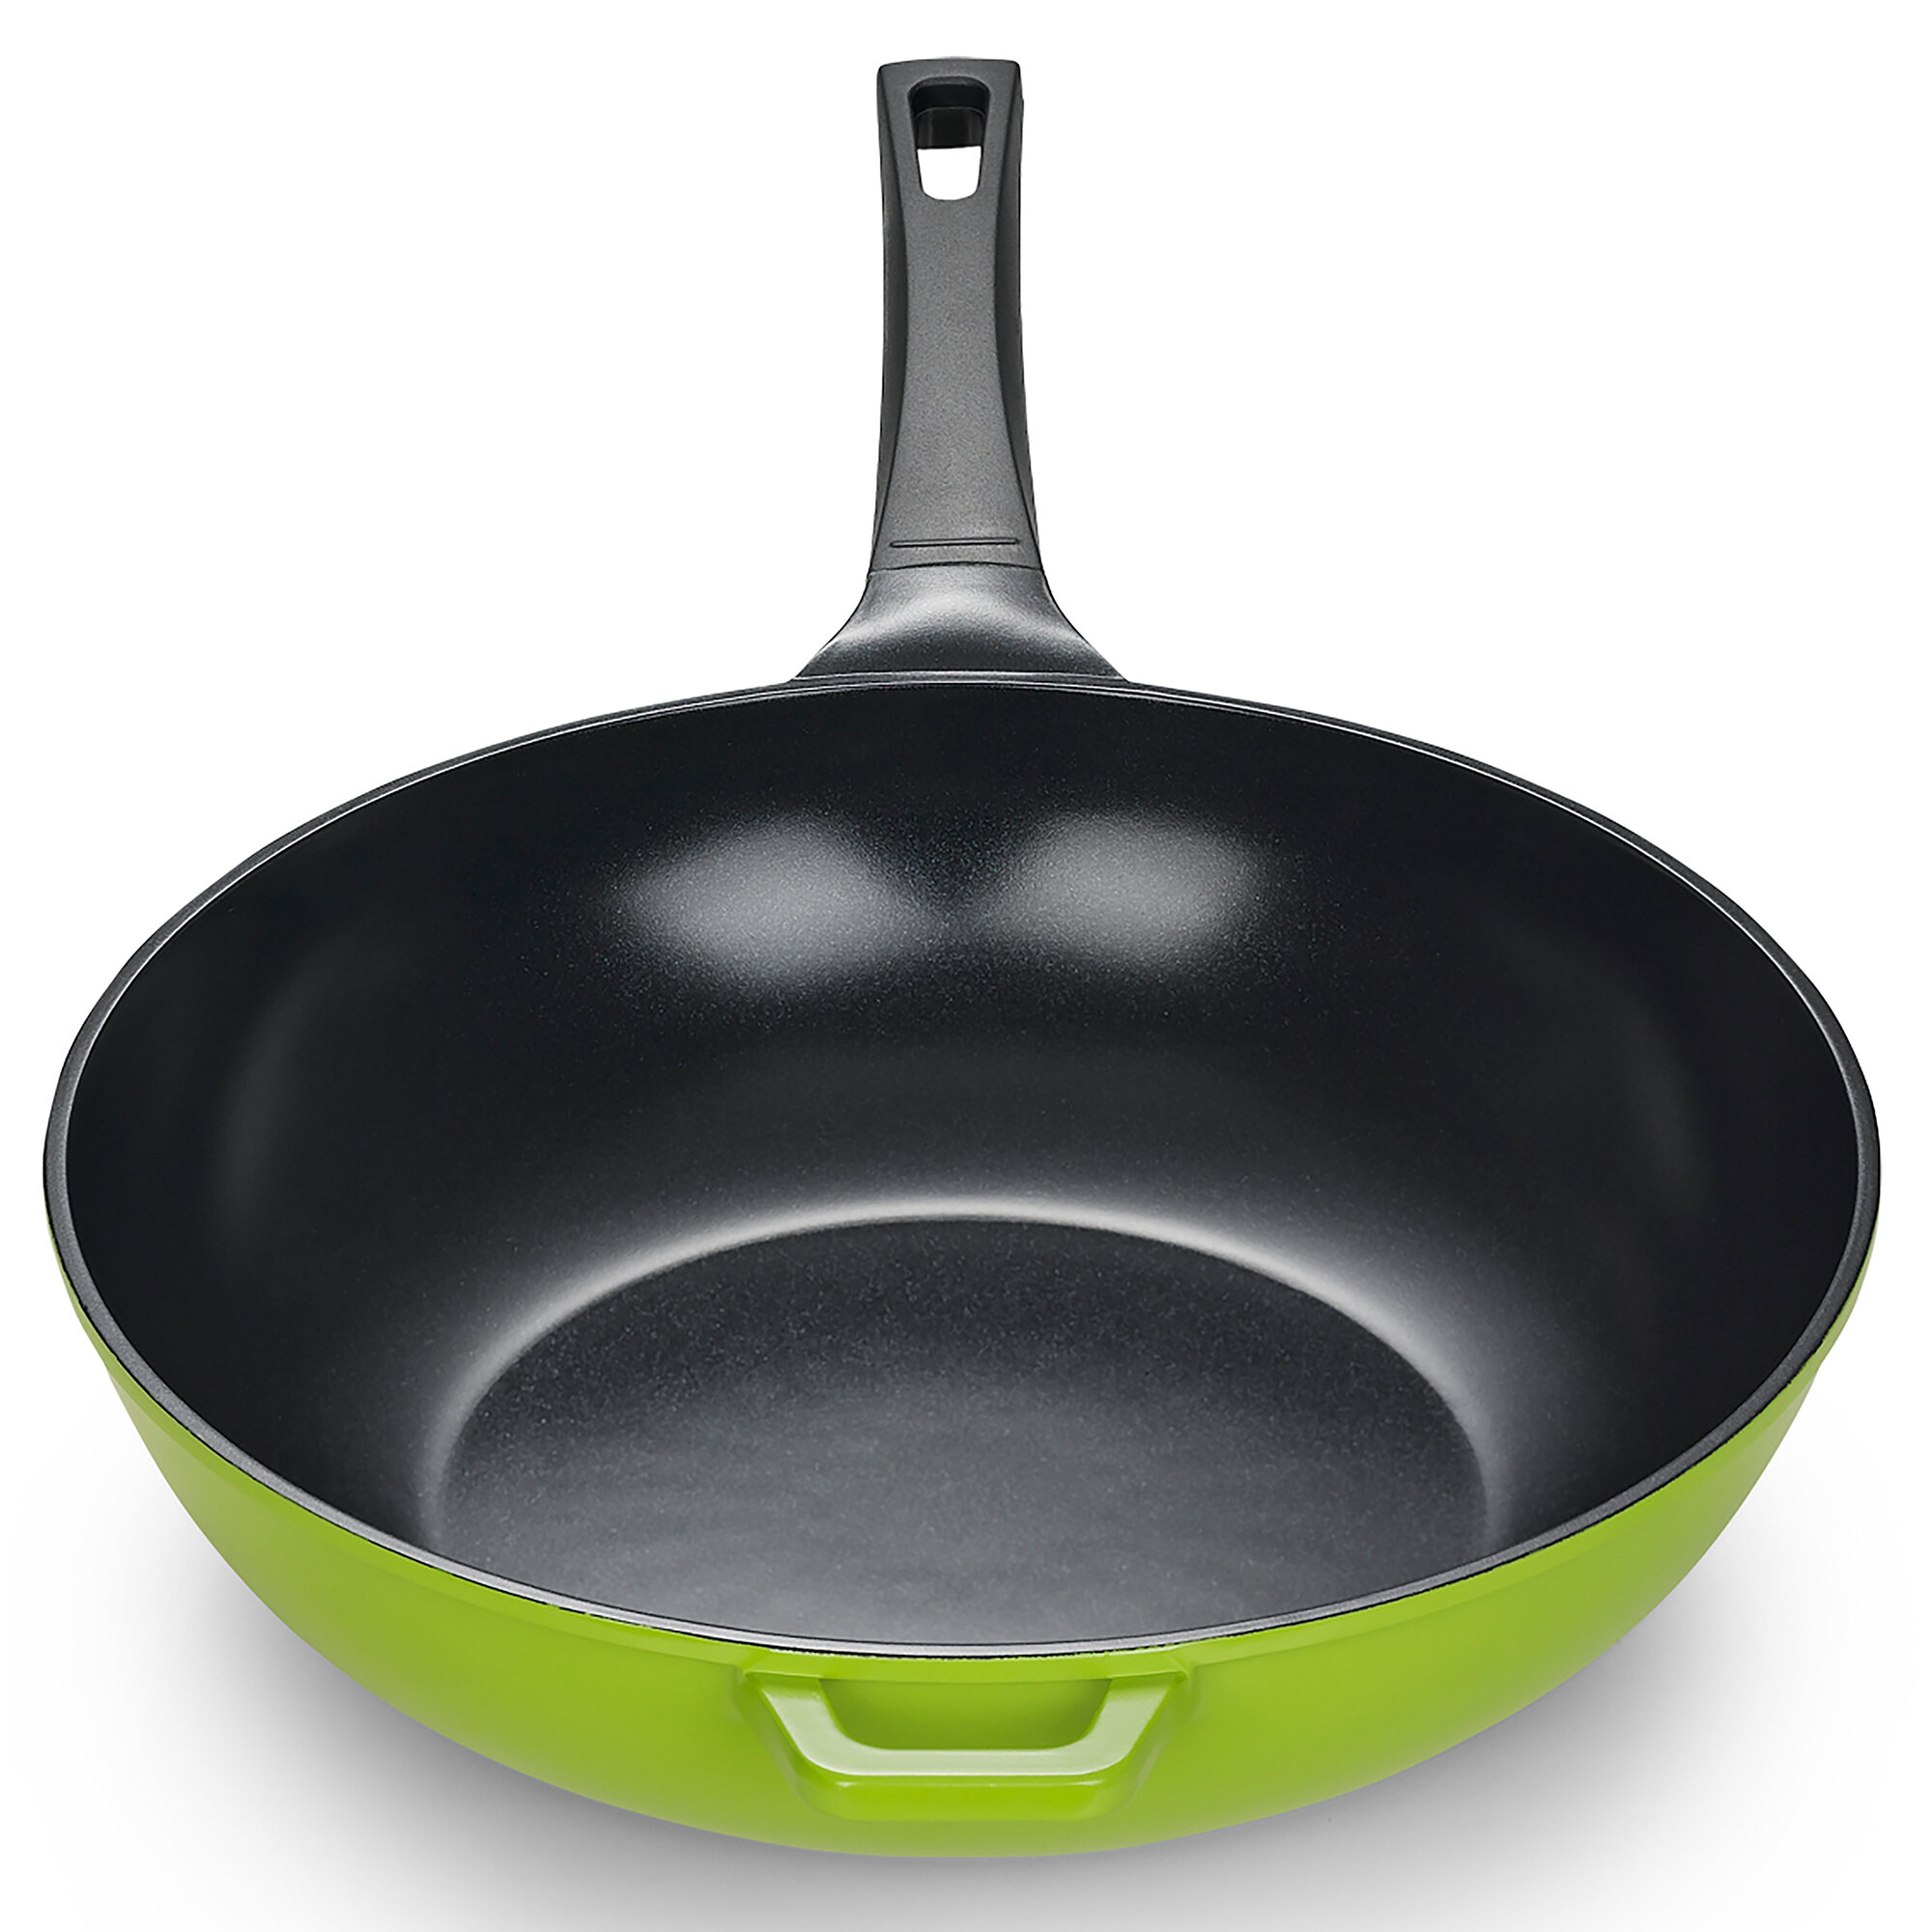 Ozeri Green Earth Wok by , with Smooth Ceramic Non-Stick Coating (100% PTFE and PFOA Free) Color: Vulcan Black ZP24-30W